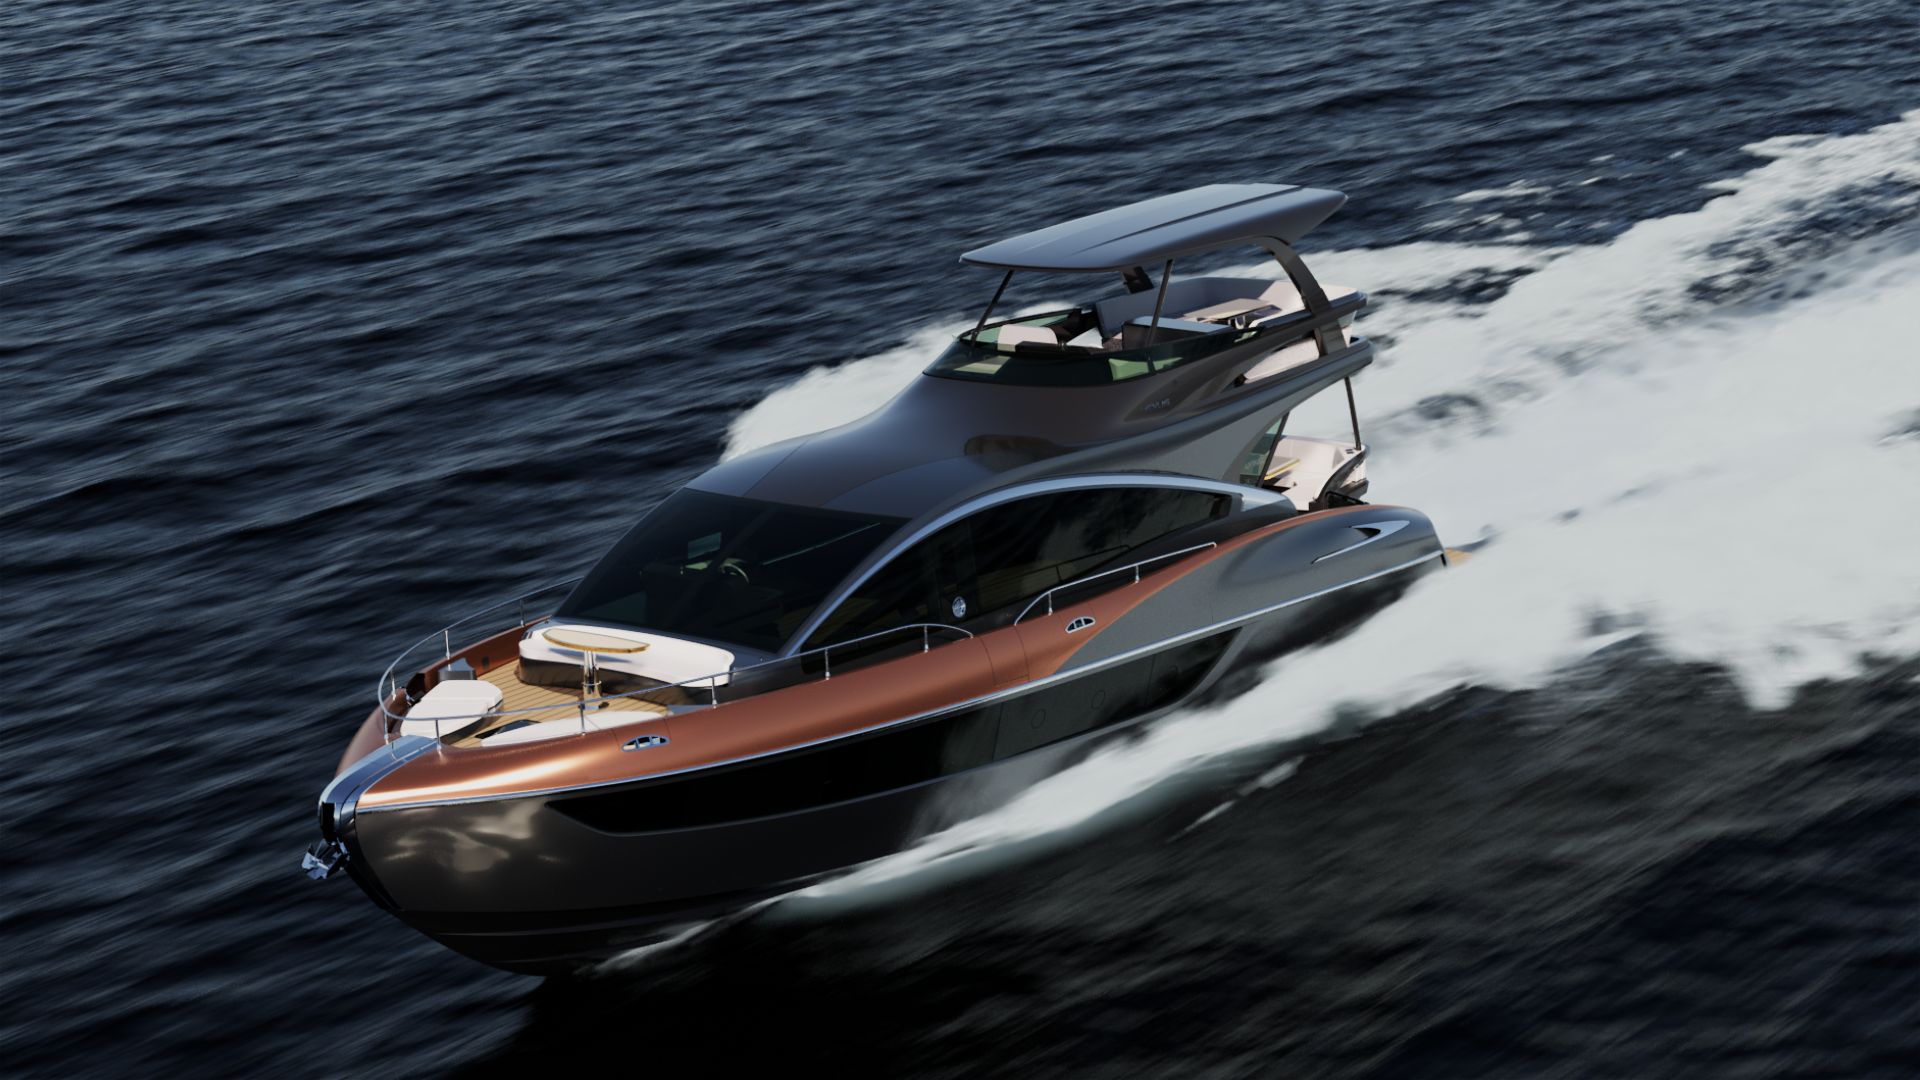 The Lexus Luxury Yacht Boasts A BBQ Grill &amp; Expanded Swimming Platform